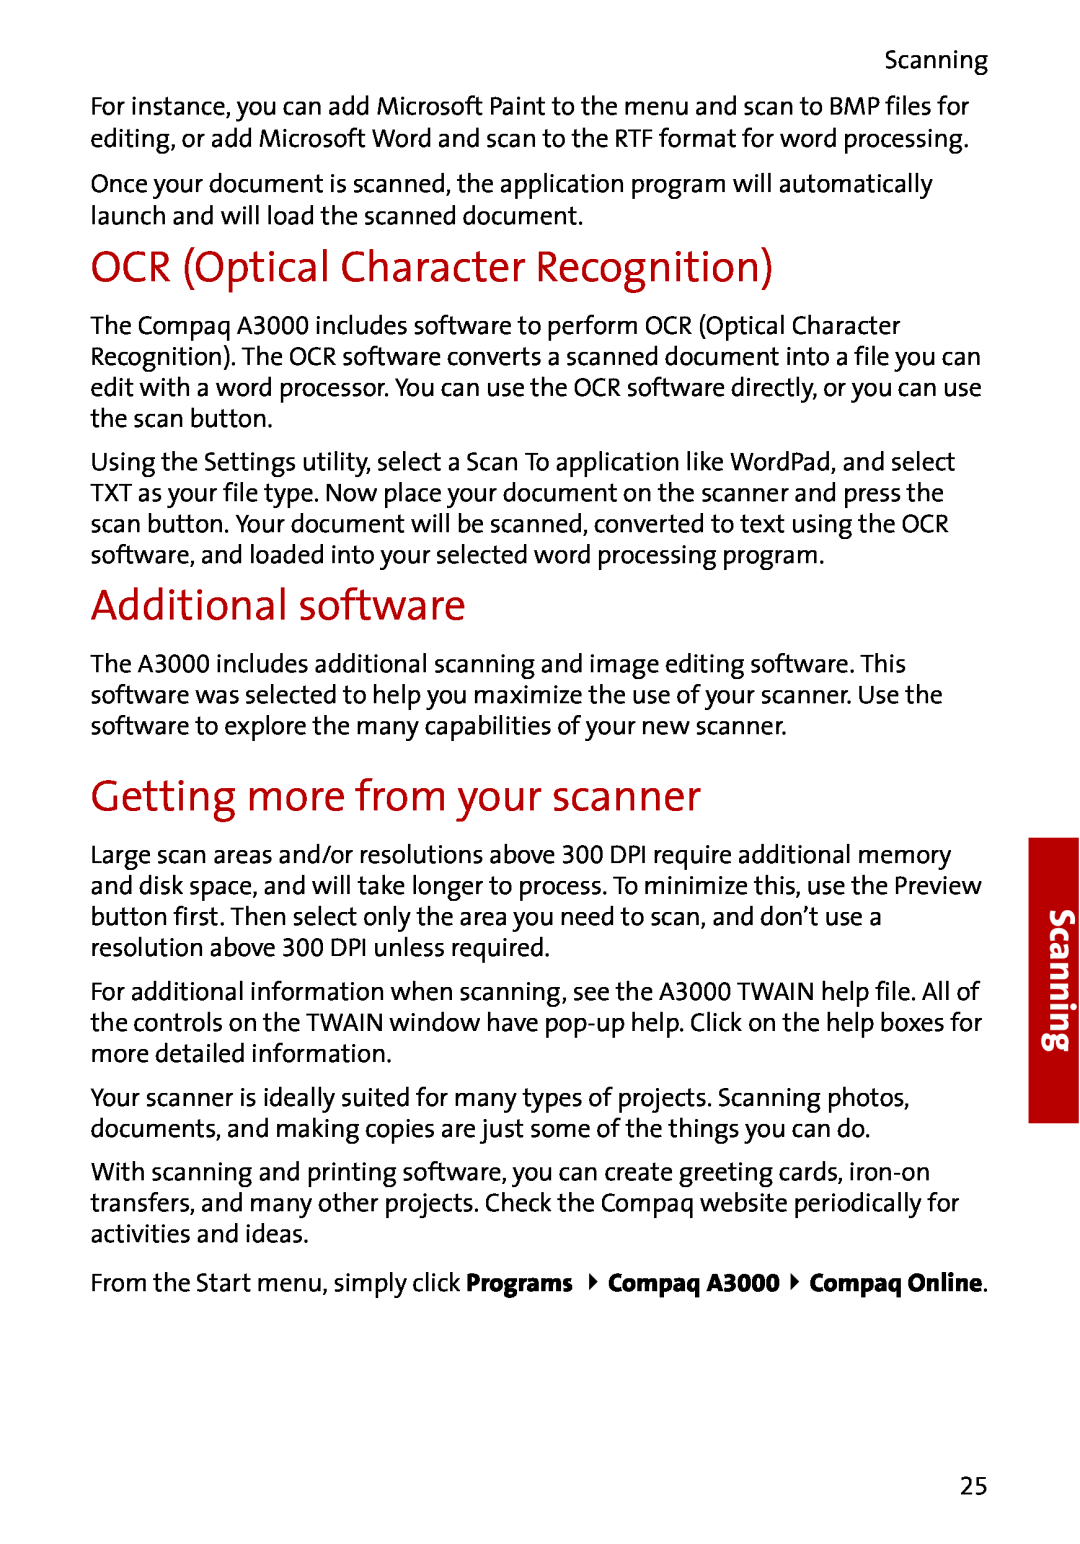 Compaq A3000 manual OCR Optical Character Recognition, Additional software, Getting more from your scanner, Scanning 